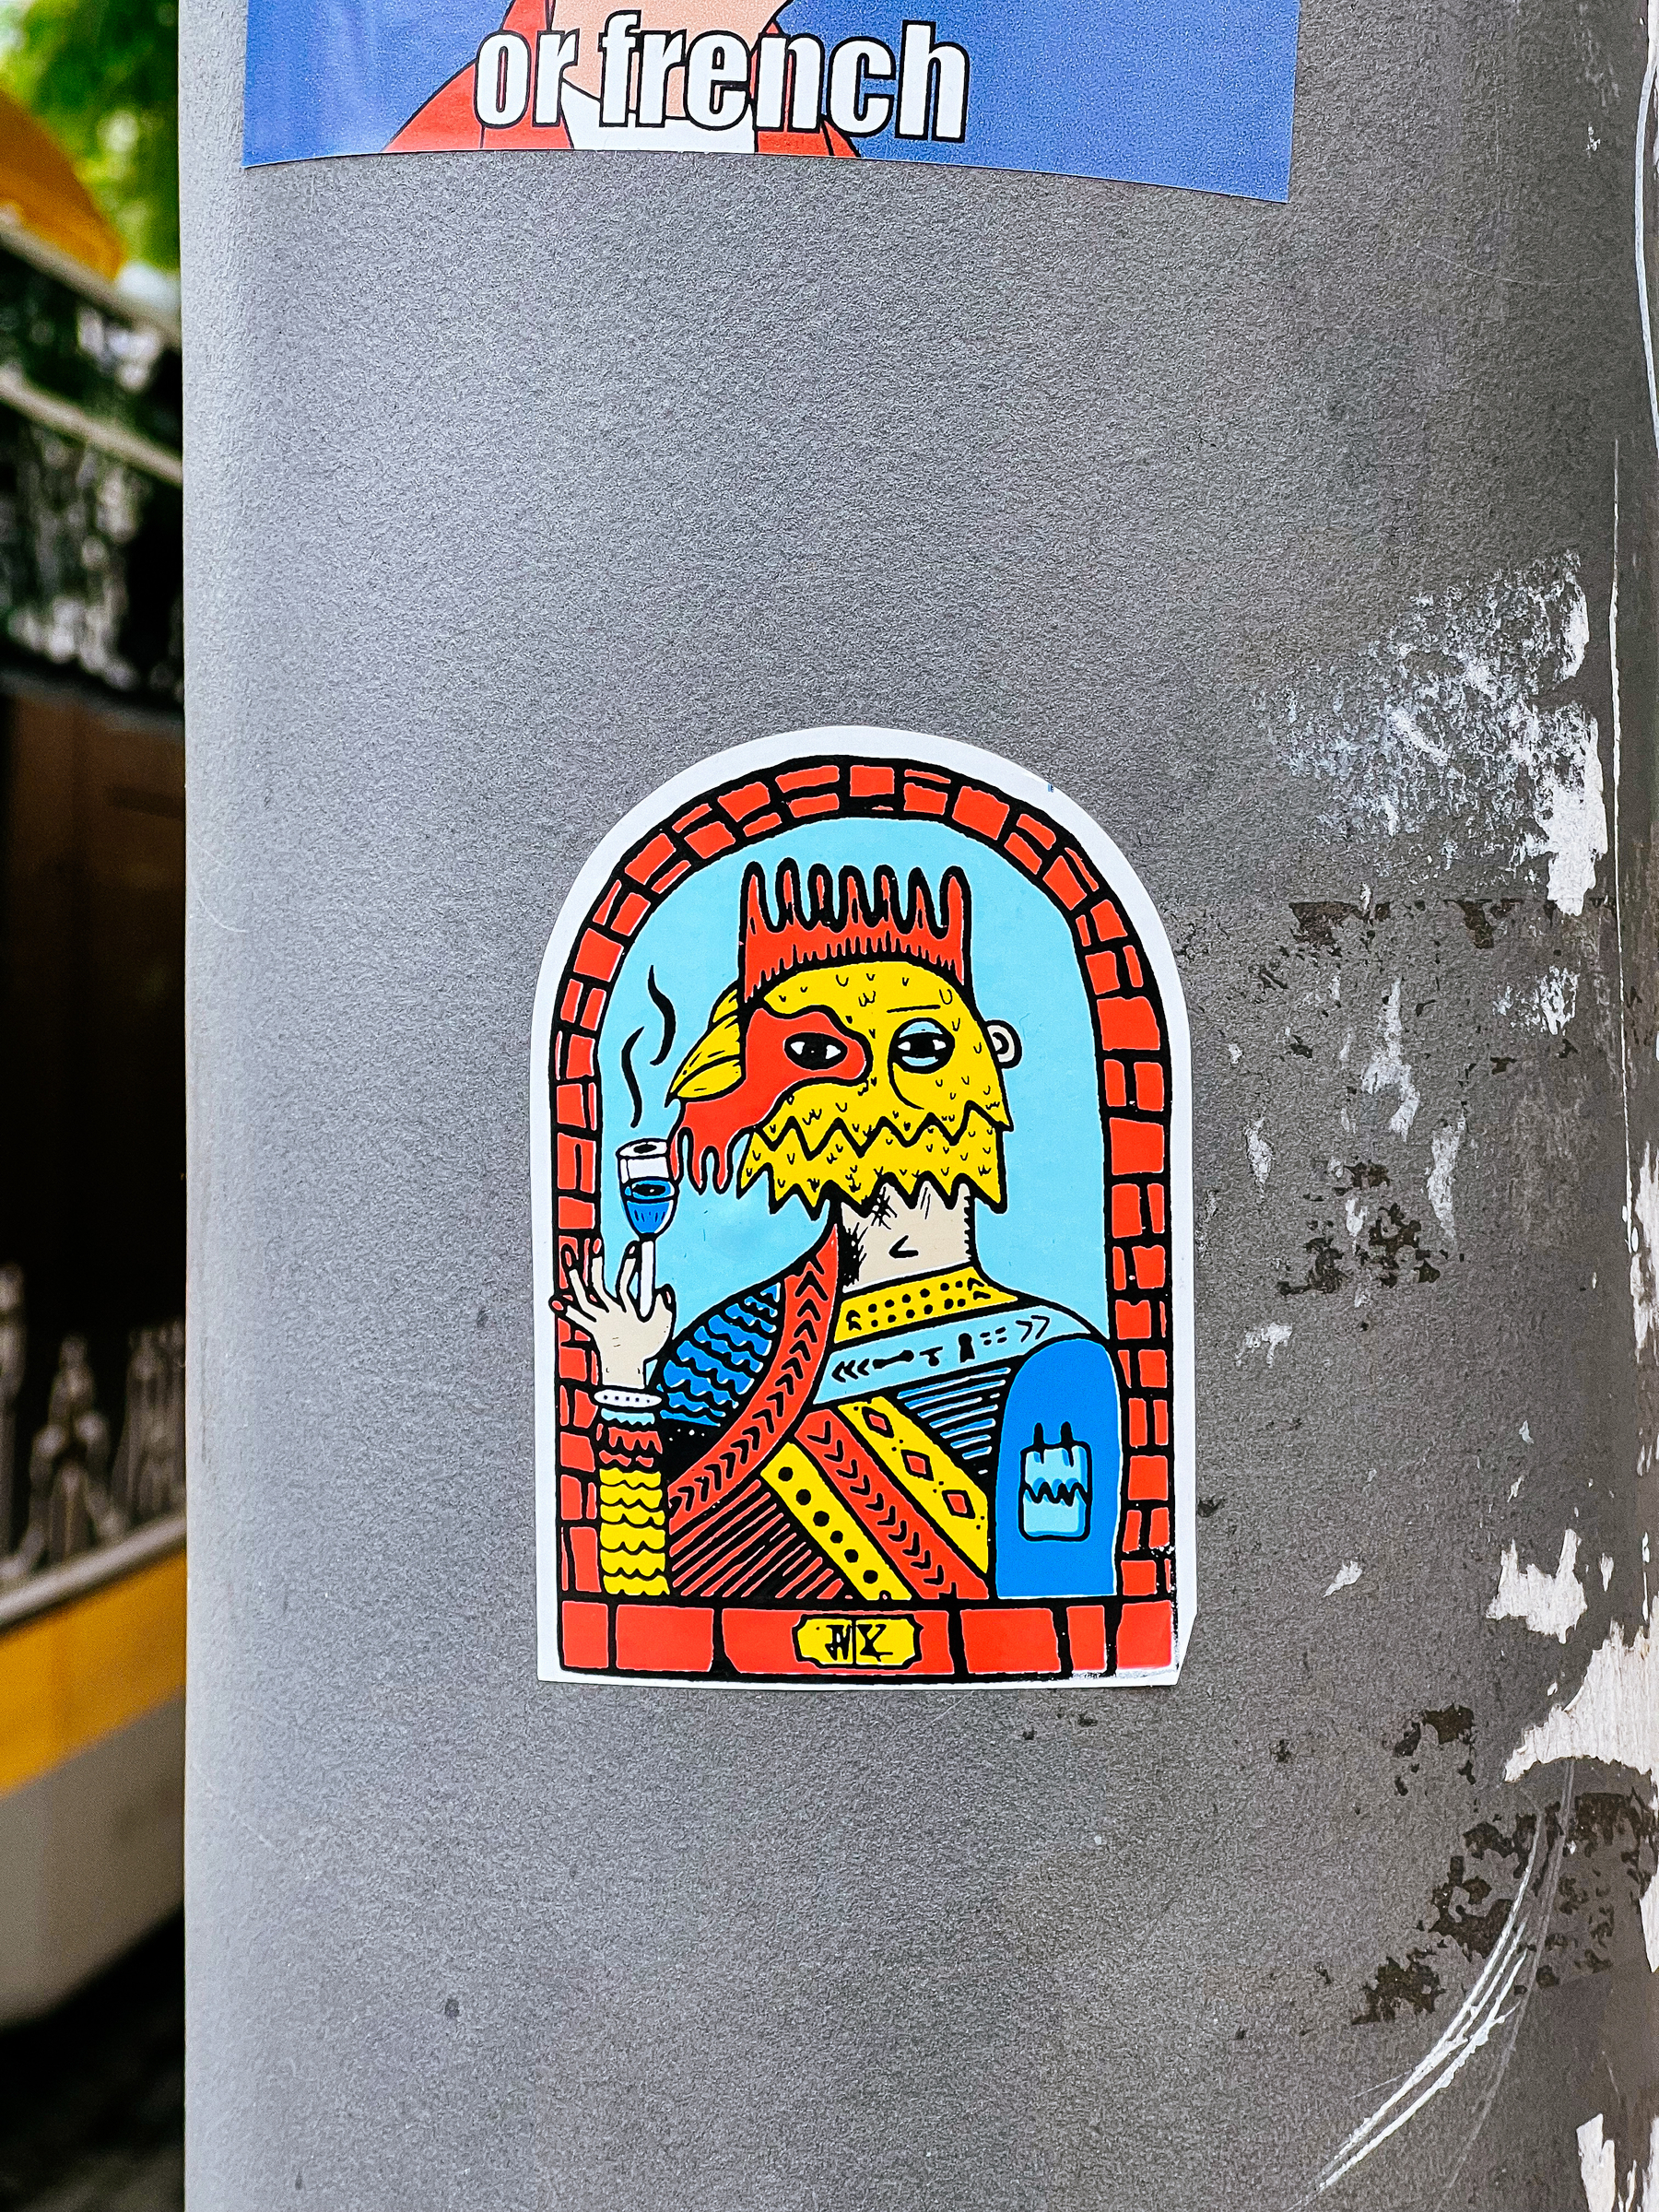 A colorful sticker depicting a stylized creature drinking from a cup.